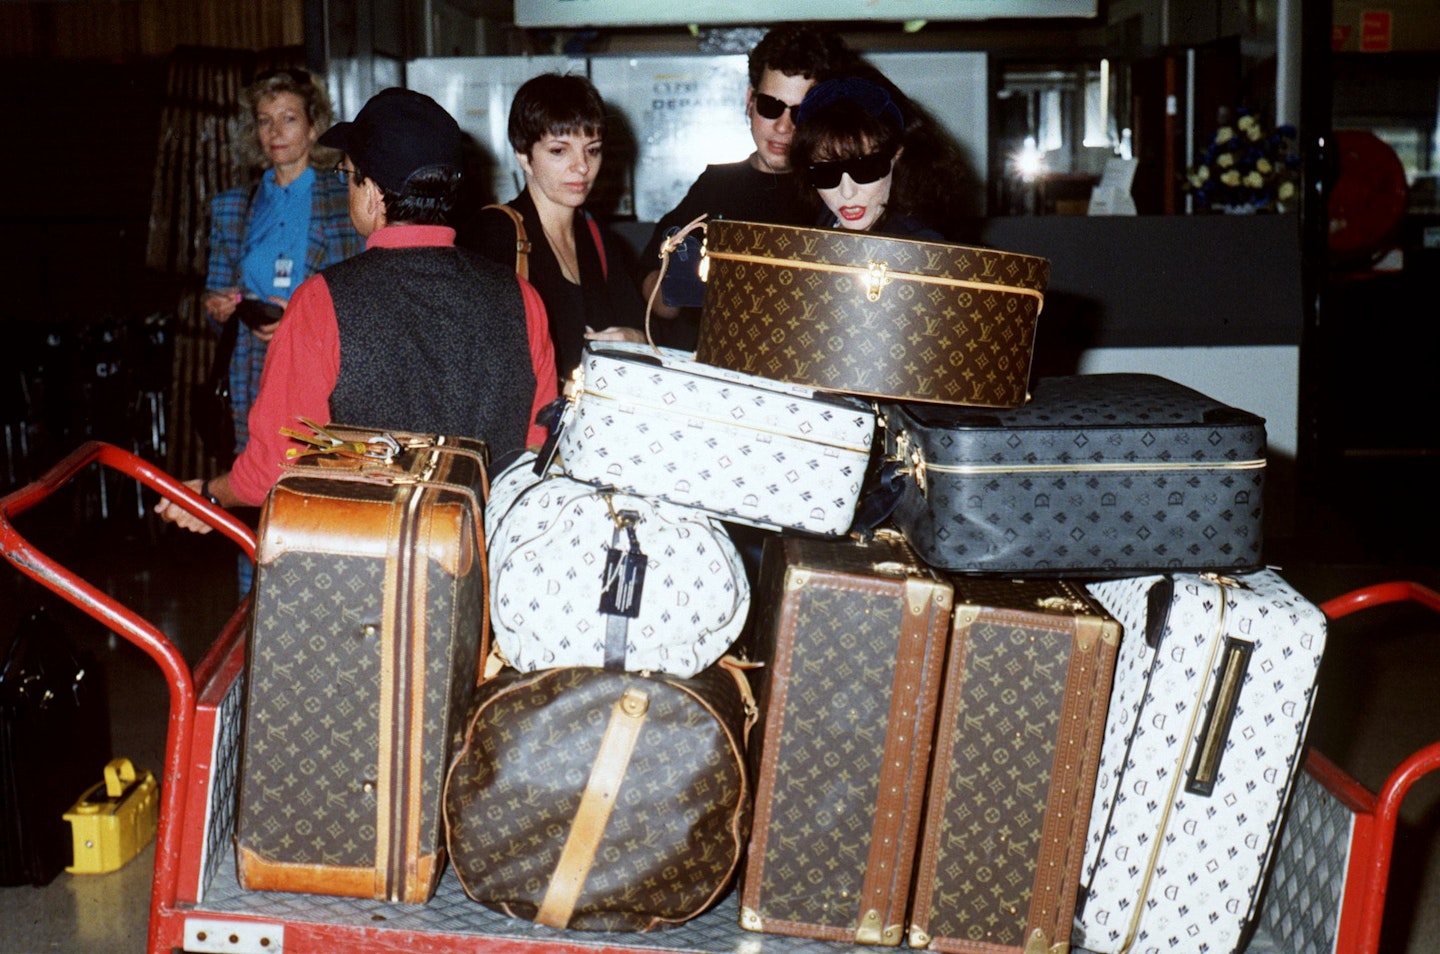 The different Louis Vuitton stores since 1854 - Bagage Collection